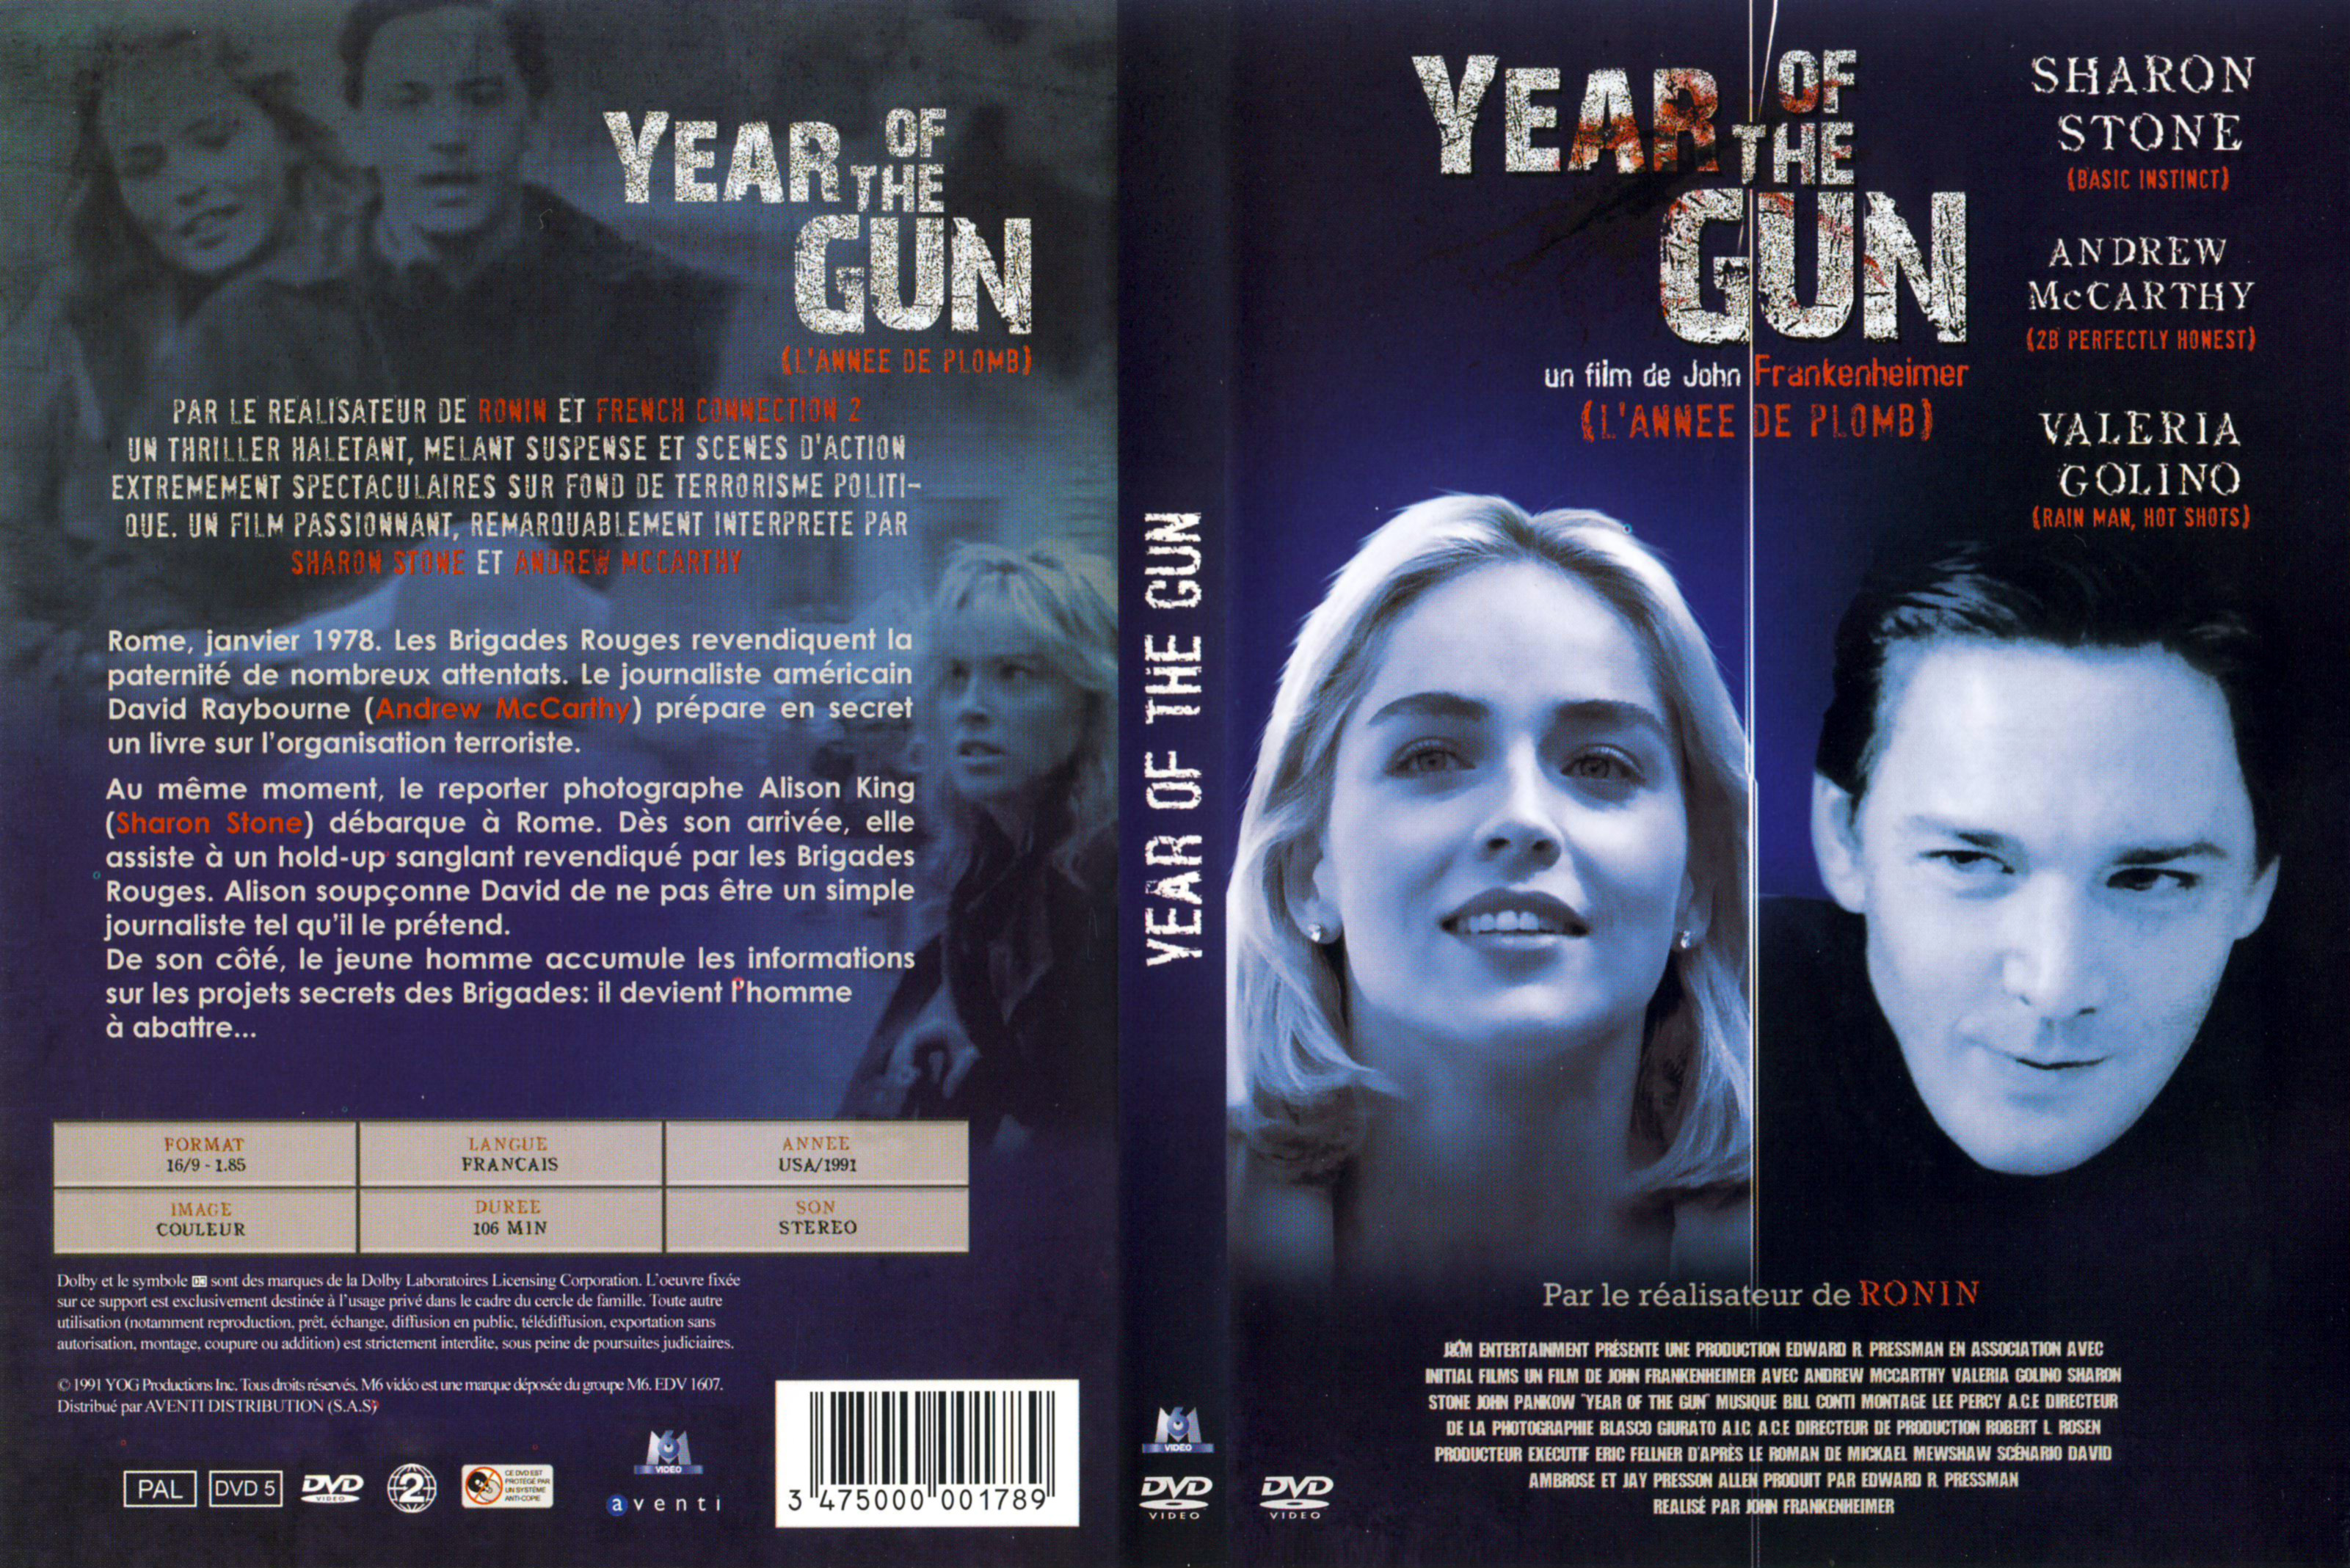 Jaquette DVD Year of the gun v3